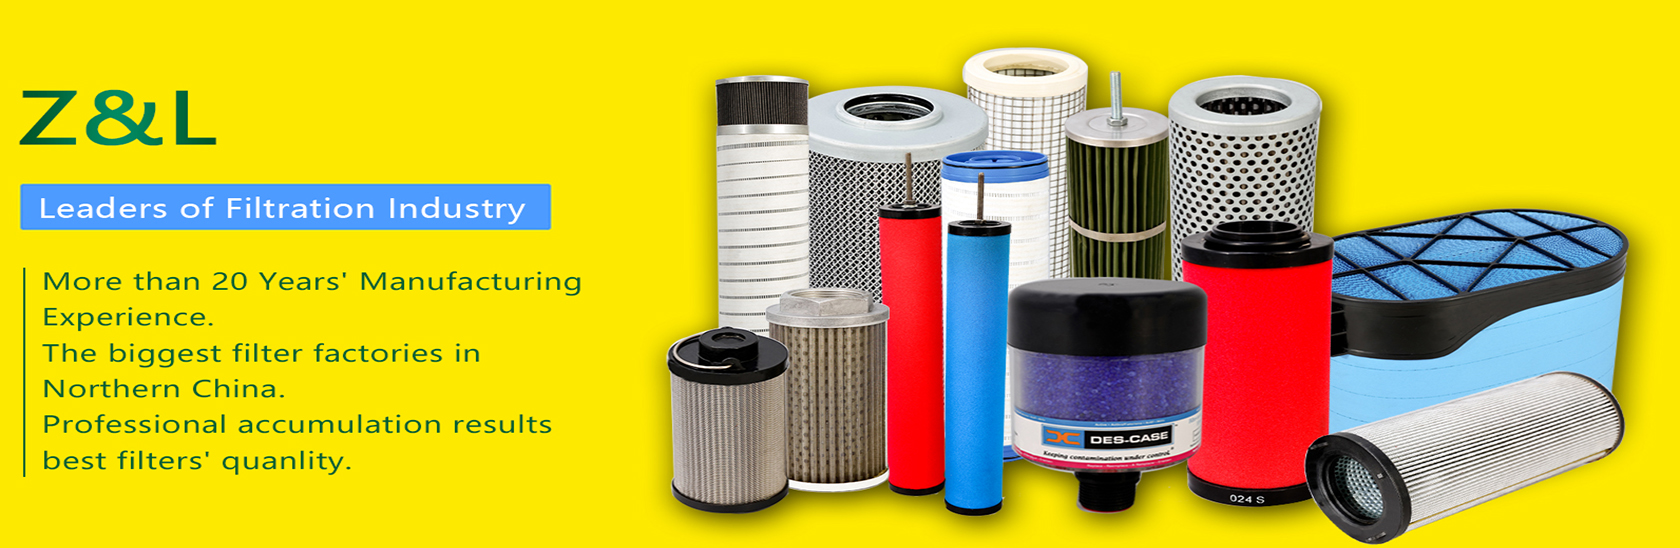 KINDS OF OIL FILTERS ,AIR FILTERS ARE ADVANCED .